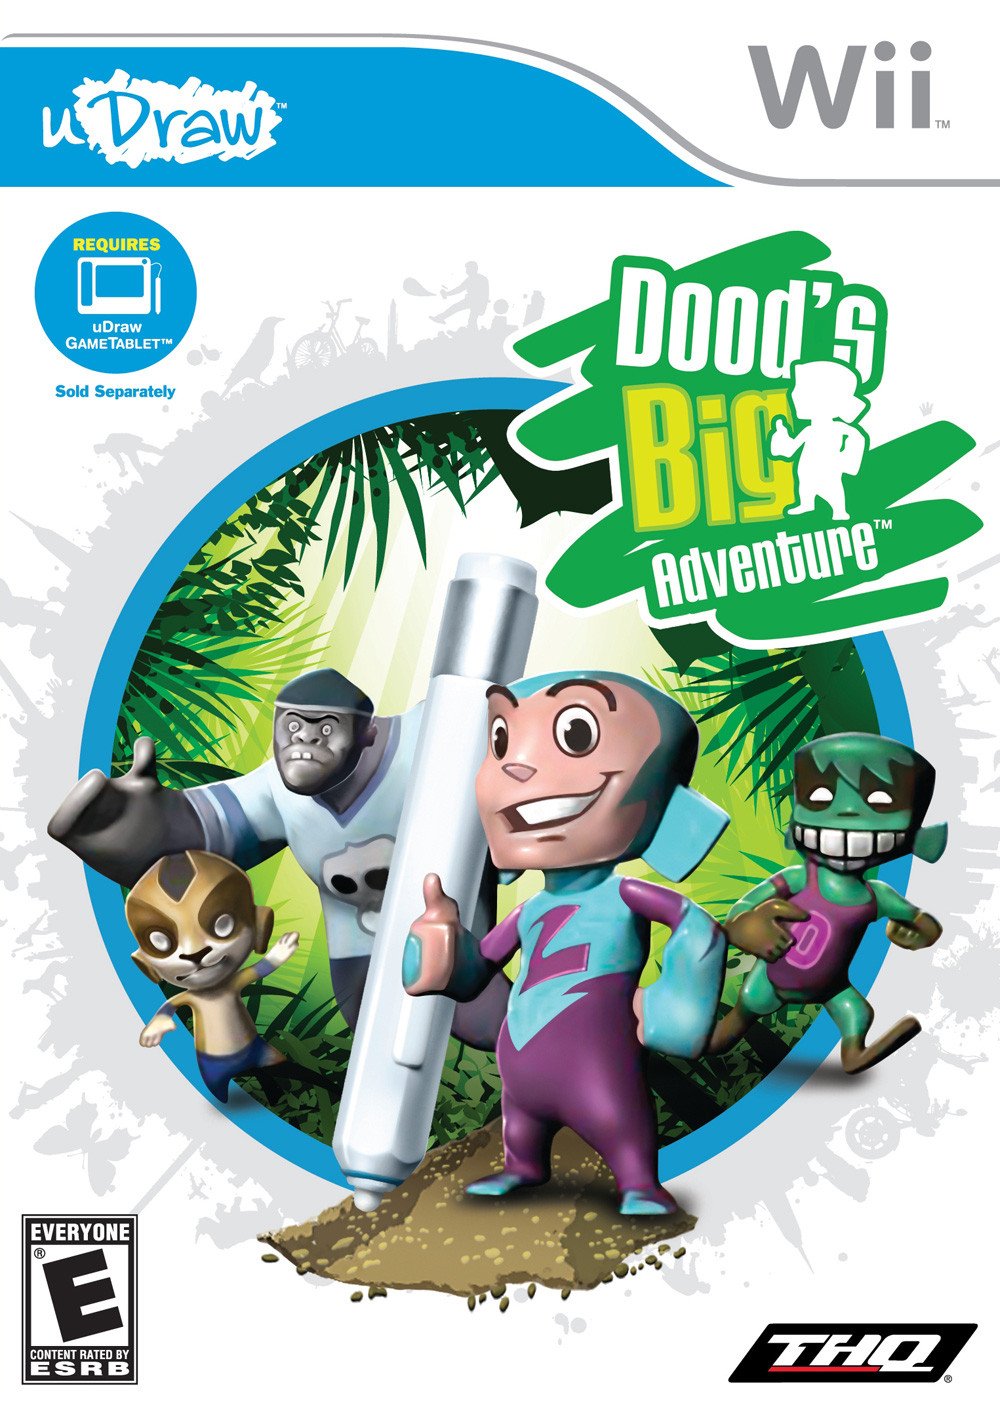 J2Games.com | Dood's Big Adventure (Wii) (Pre-Played - Game Only).